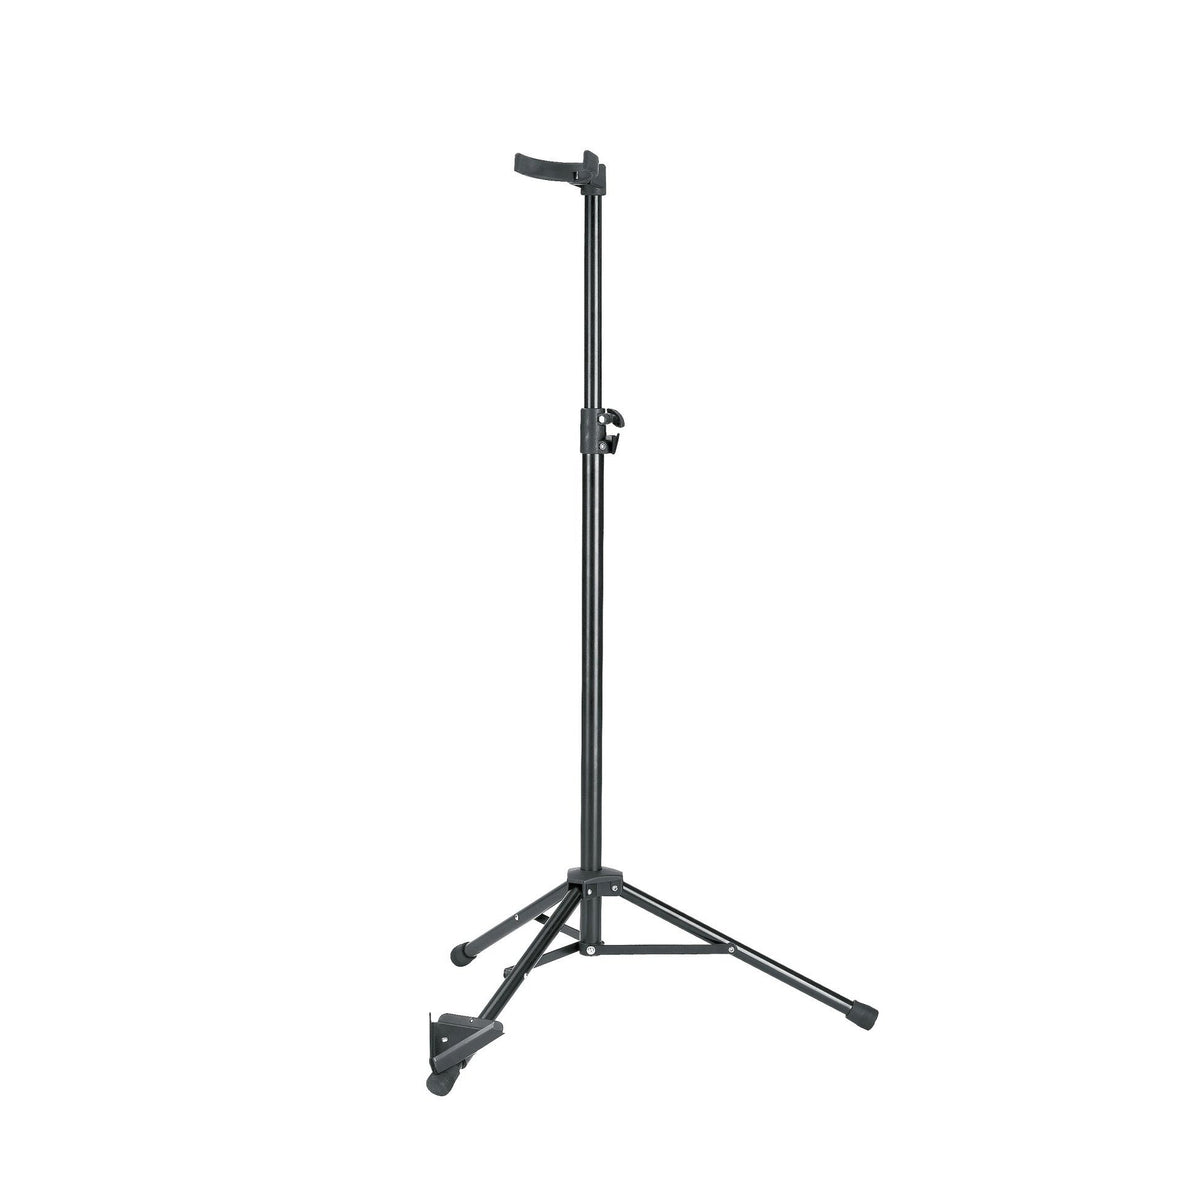 KÃ¶nig &amp; Meyer - 14160 Electric Double Bass Stand-Instrument Stand-KÃ¶nig &amp; Meyer-Music Elements